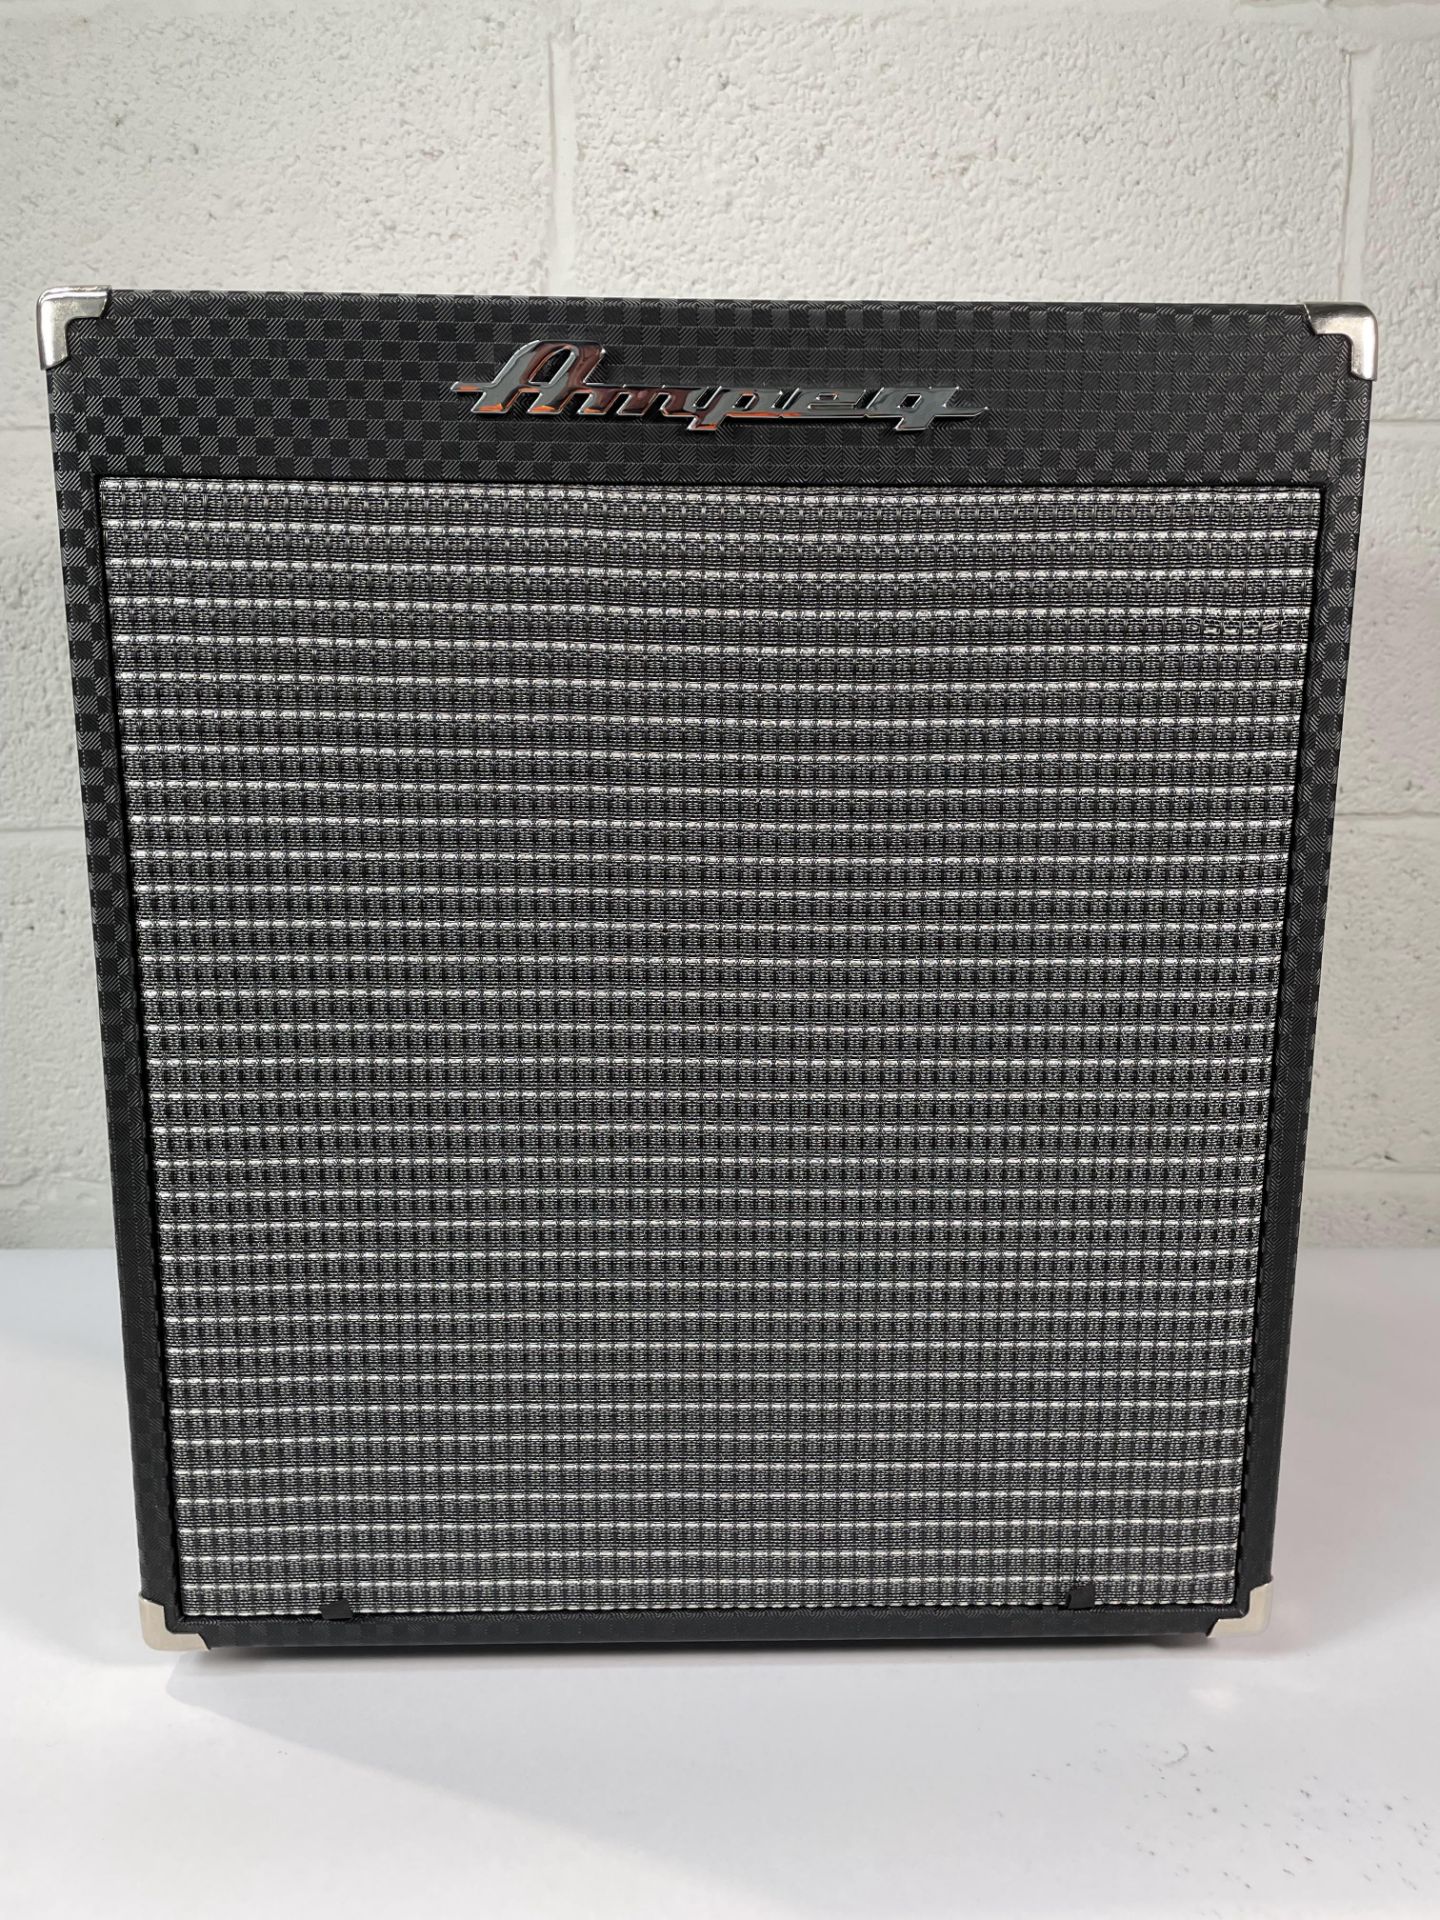 Ampeq RB-110 Rocket Bass - Bass Amp - Pre-Owned (bare unit).